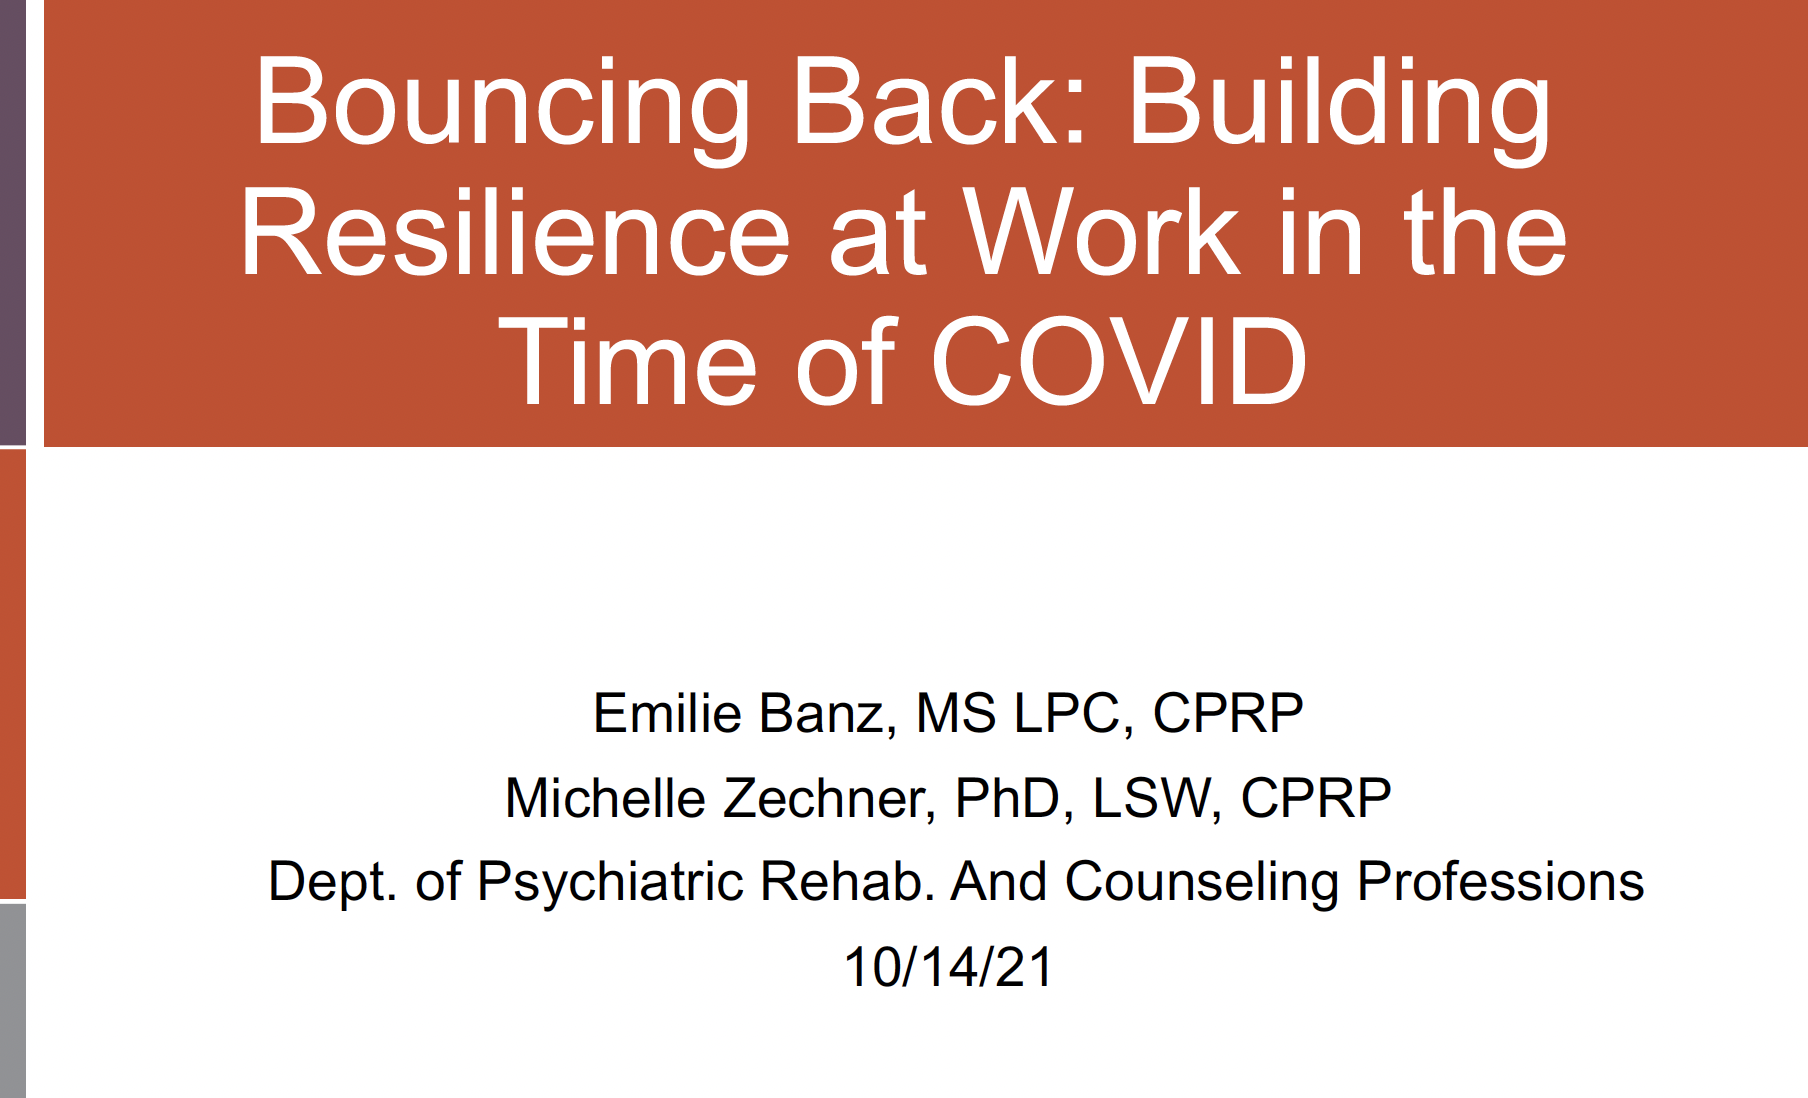 Bouncing Back: Building Resilience at Work in the Time of COVID